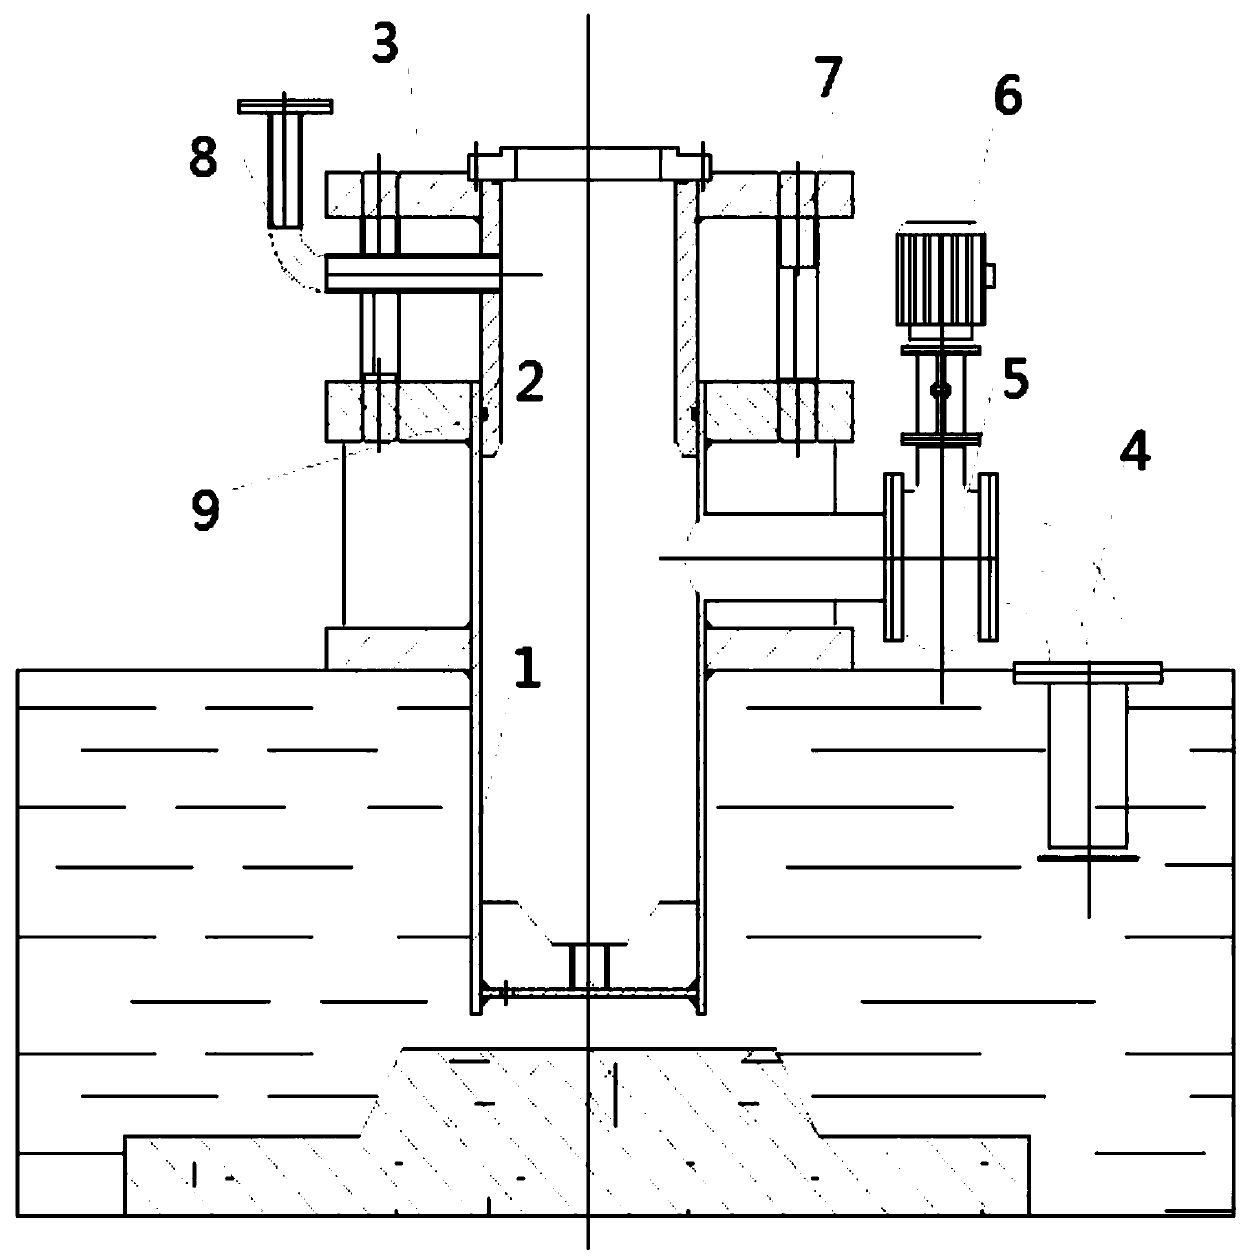 Semi-submersible type hydraulic testing device for vertical and axial suction centrifugal pump